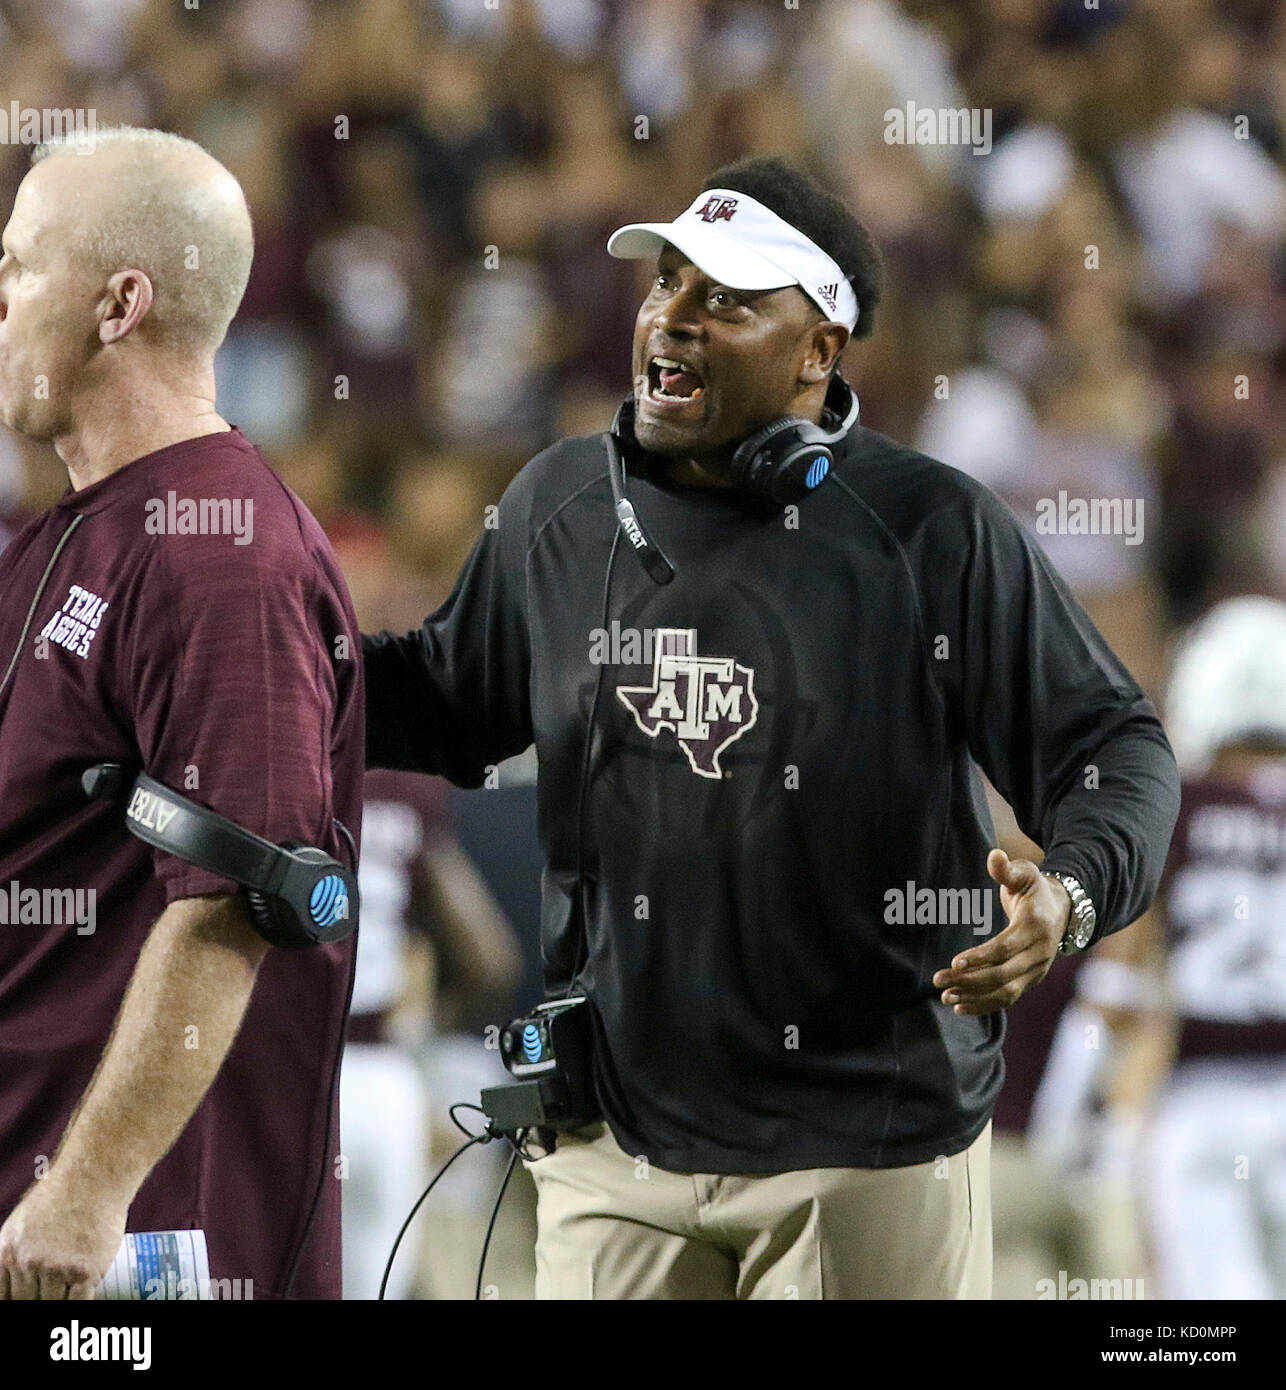 October 6, 2017: Texas A&M Aggies head coach Kevin Sumlin during the NCAA football game between the Alabama Crimson Tide and the Texas A&M Aggies at Kyle Field in College Station, TX; John Glaser/CSM. Stock Photo